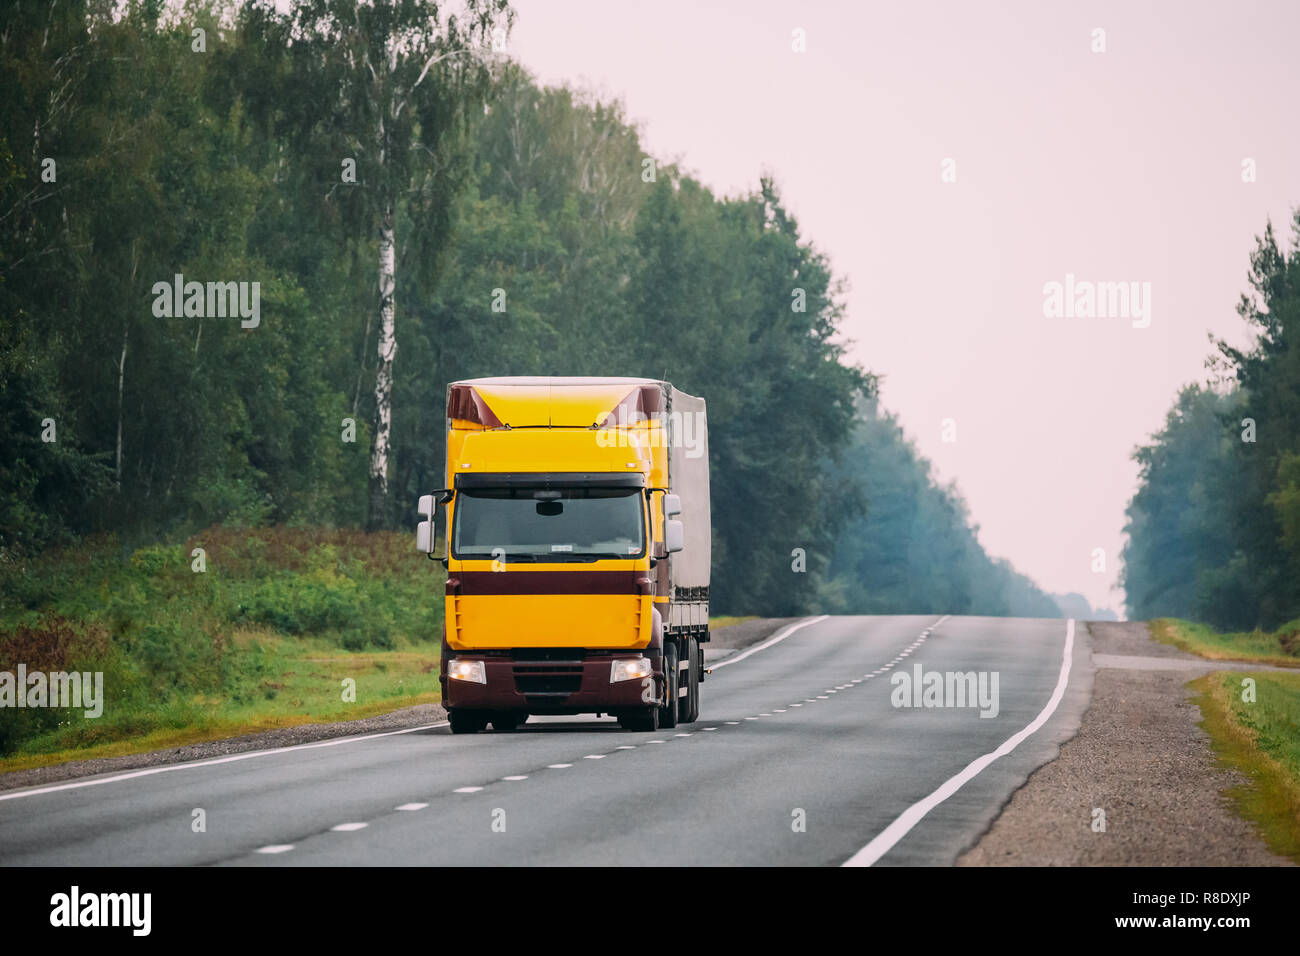 Yellow Truck Or Tractor Unit, Prime Mover, Traction Unit In Motion On Road, Freeway. Asphalt Motorway Highway Against Background Of Forest Landscape.  Stock Photo